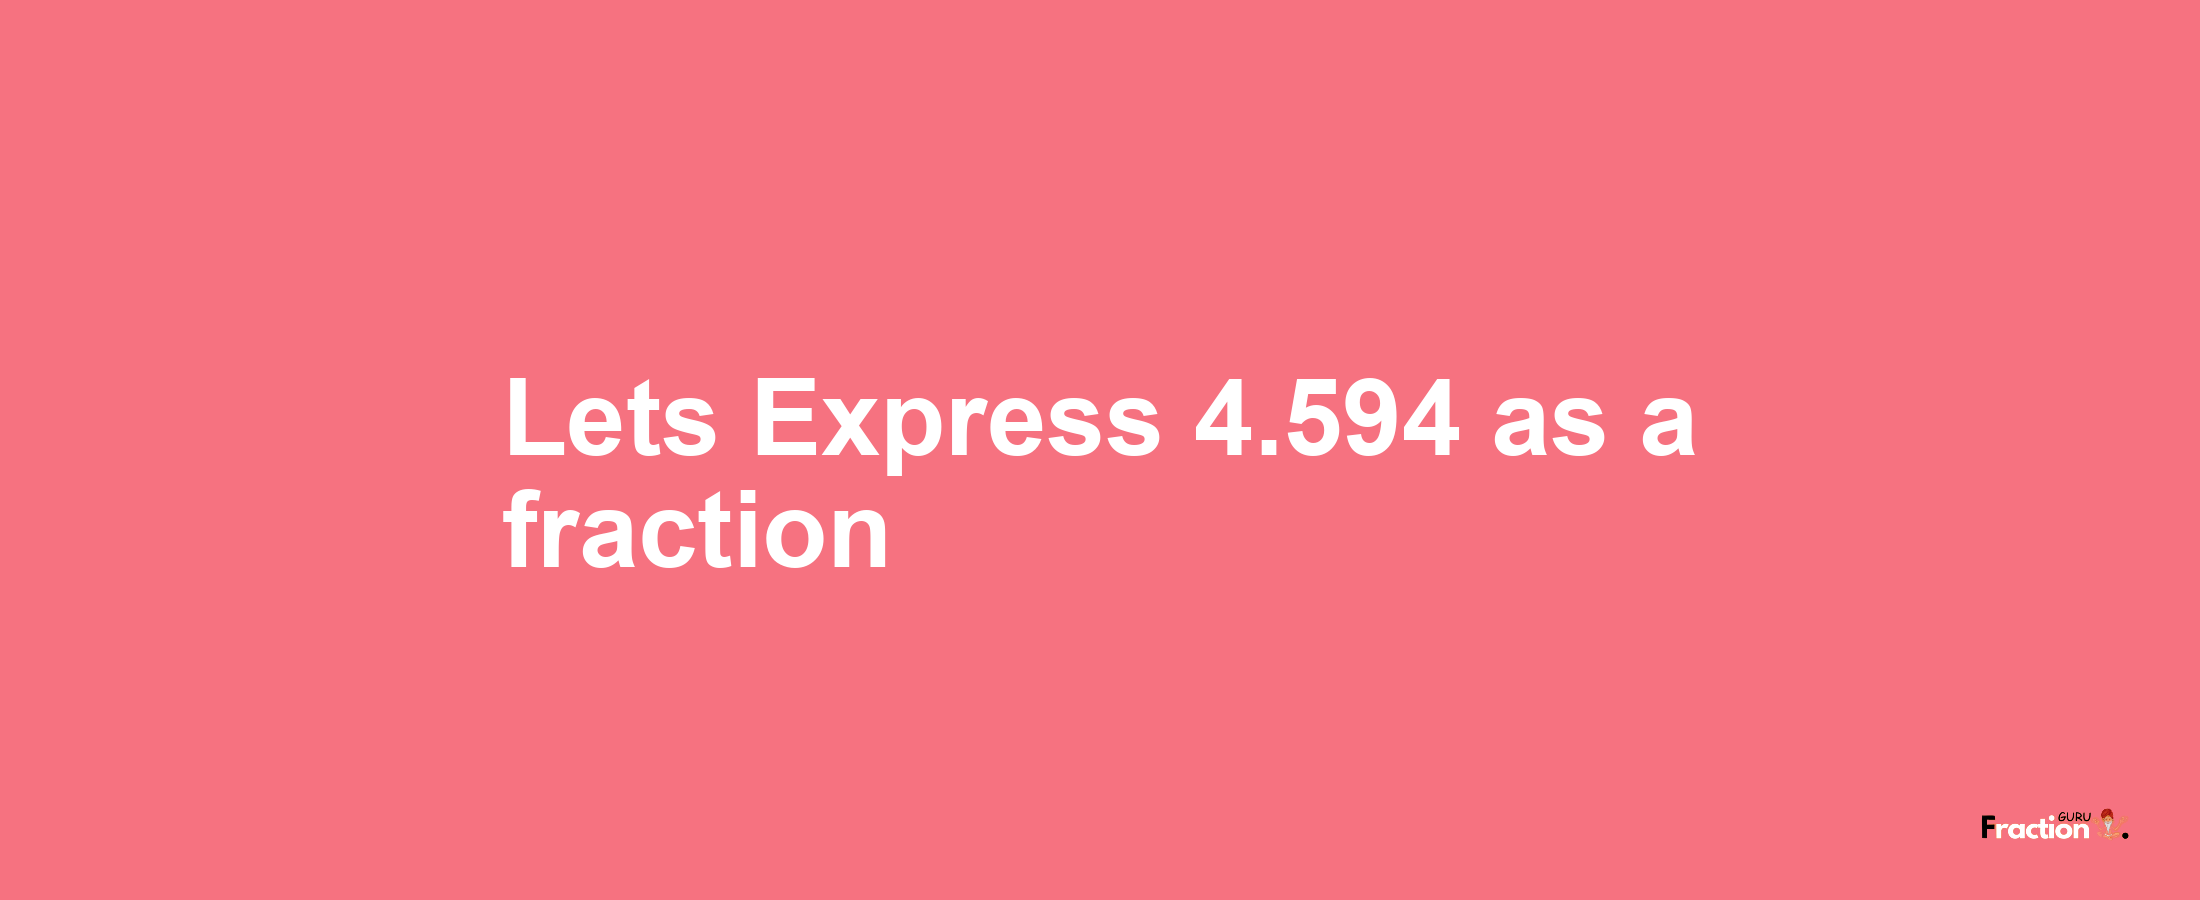 Lets Express 4.594 as afraction